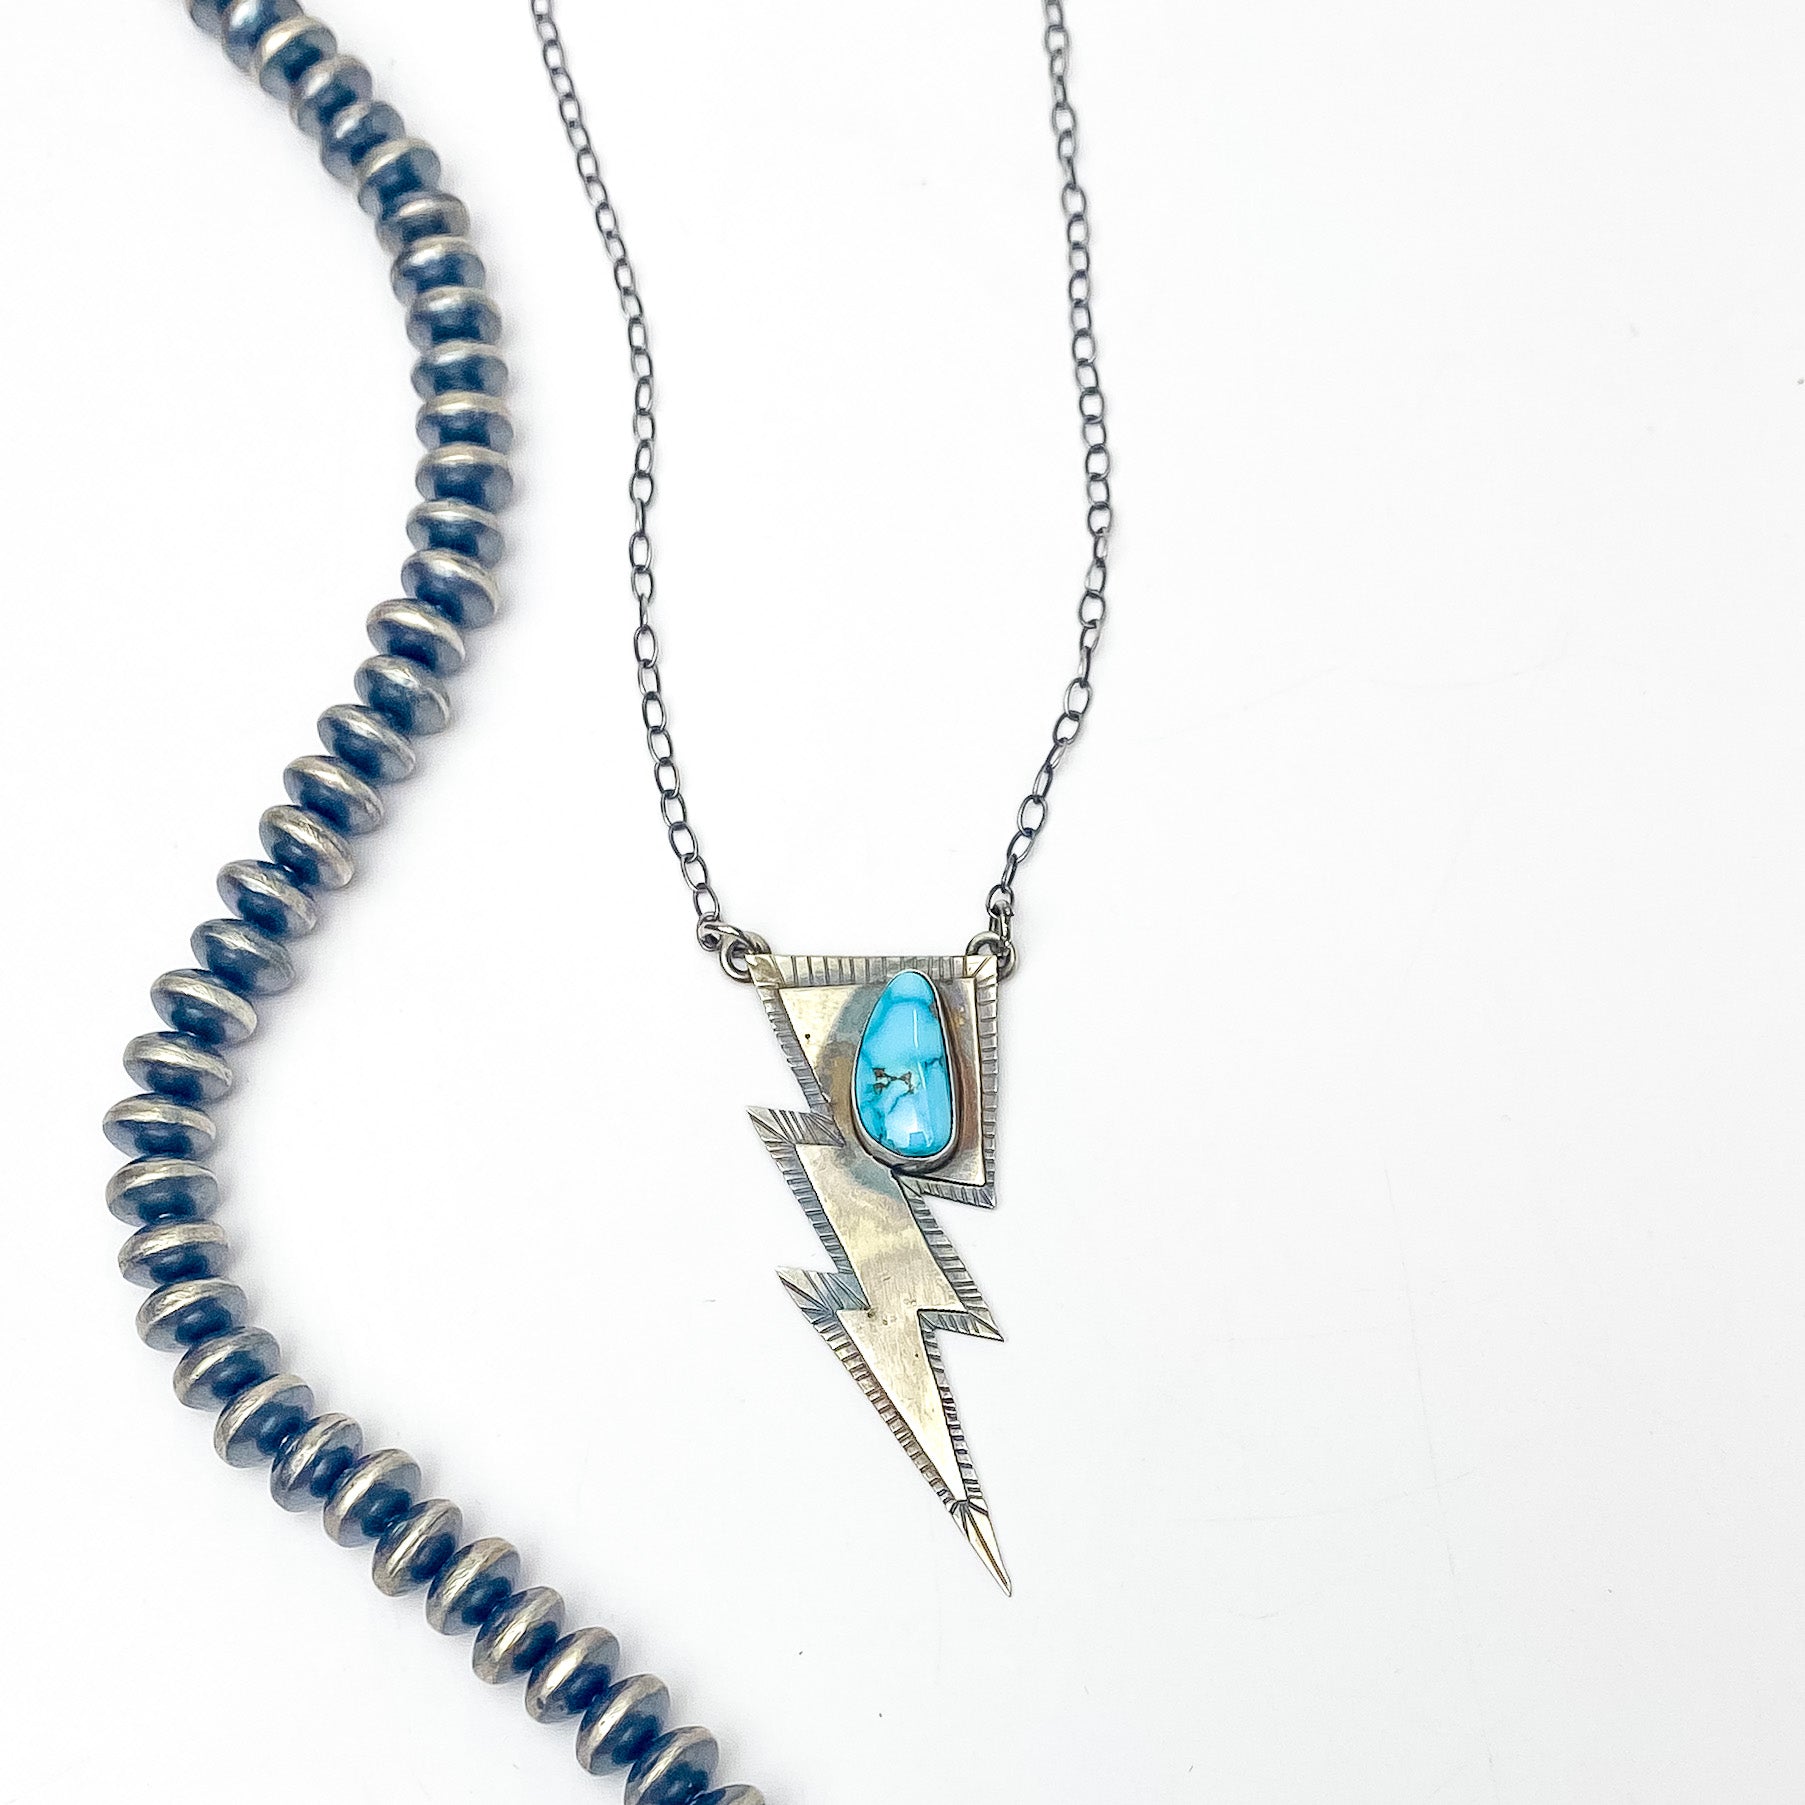 Pictured is a silver chain necklace with a silver lightning bolt pendant and a turquoise stone. This necklace is pictured on a white background with silver beads on the left side. 